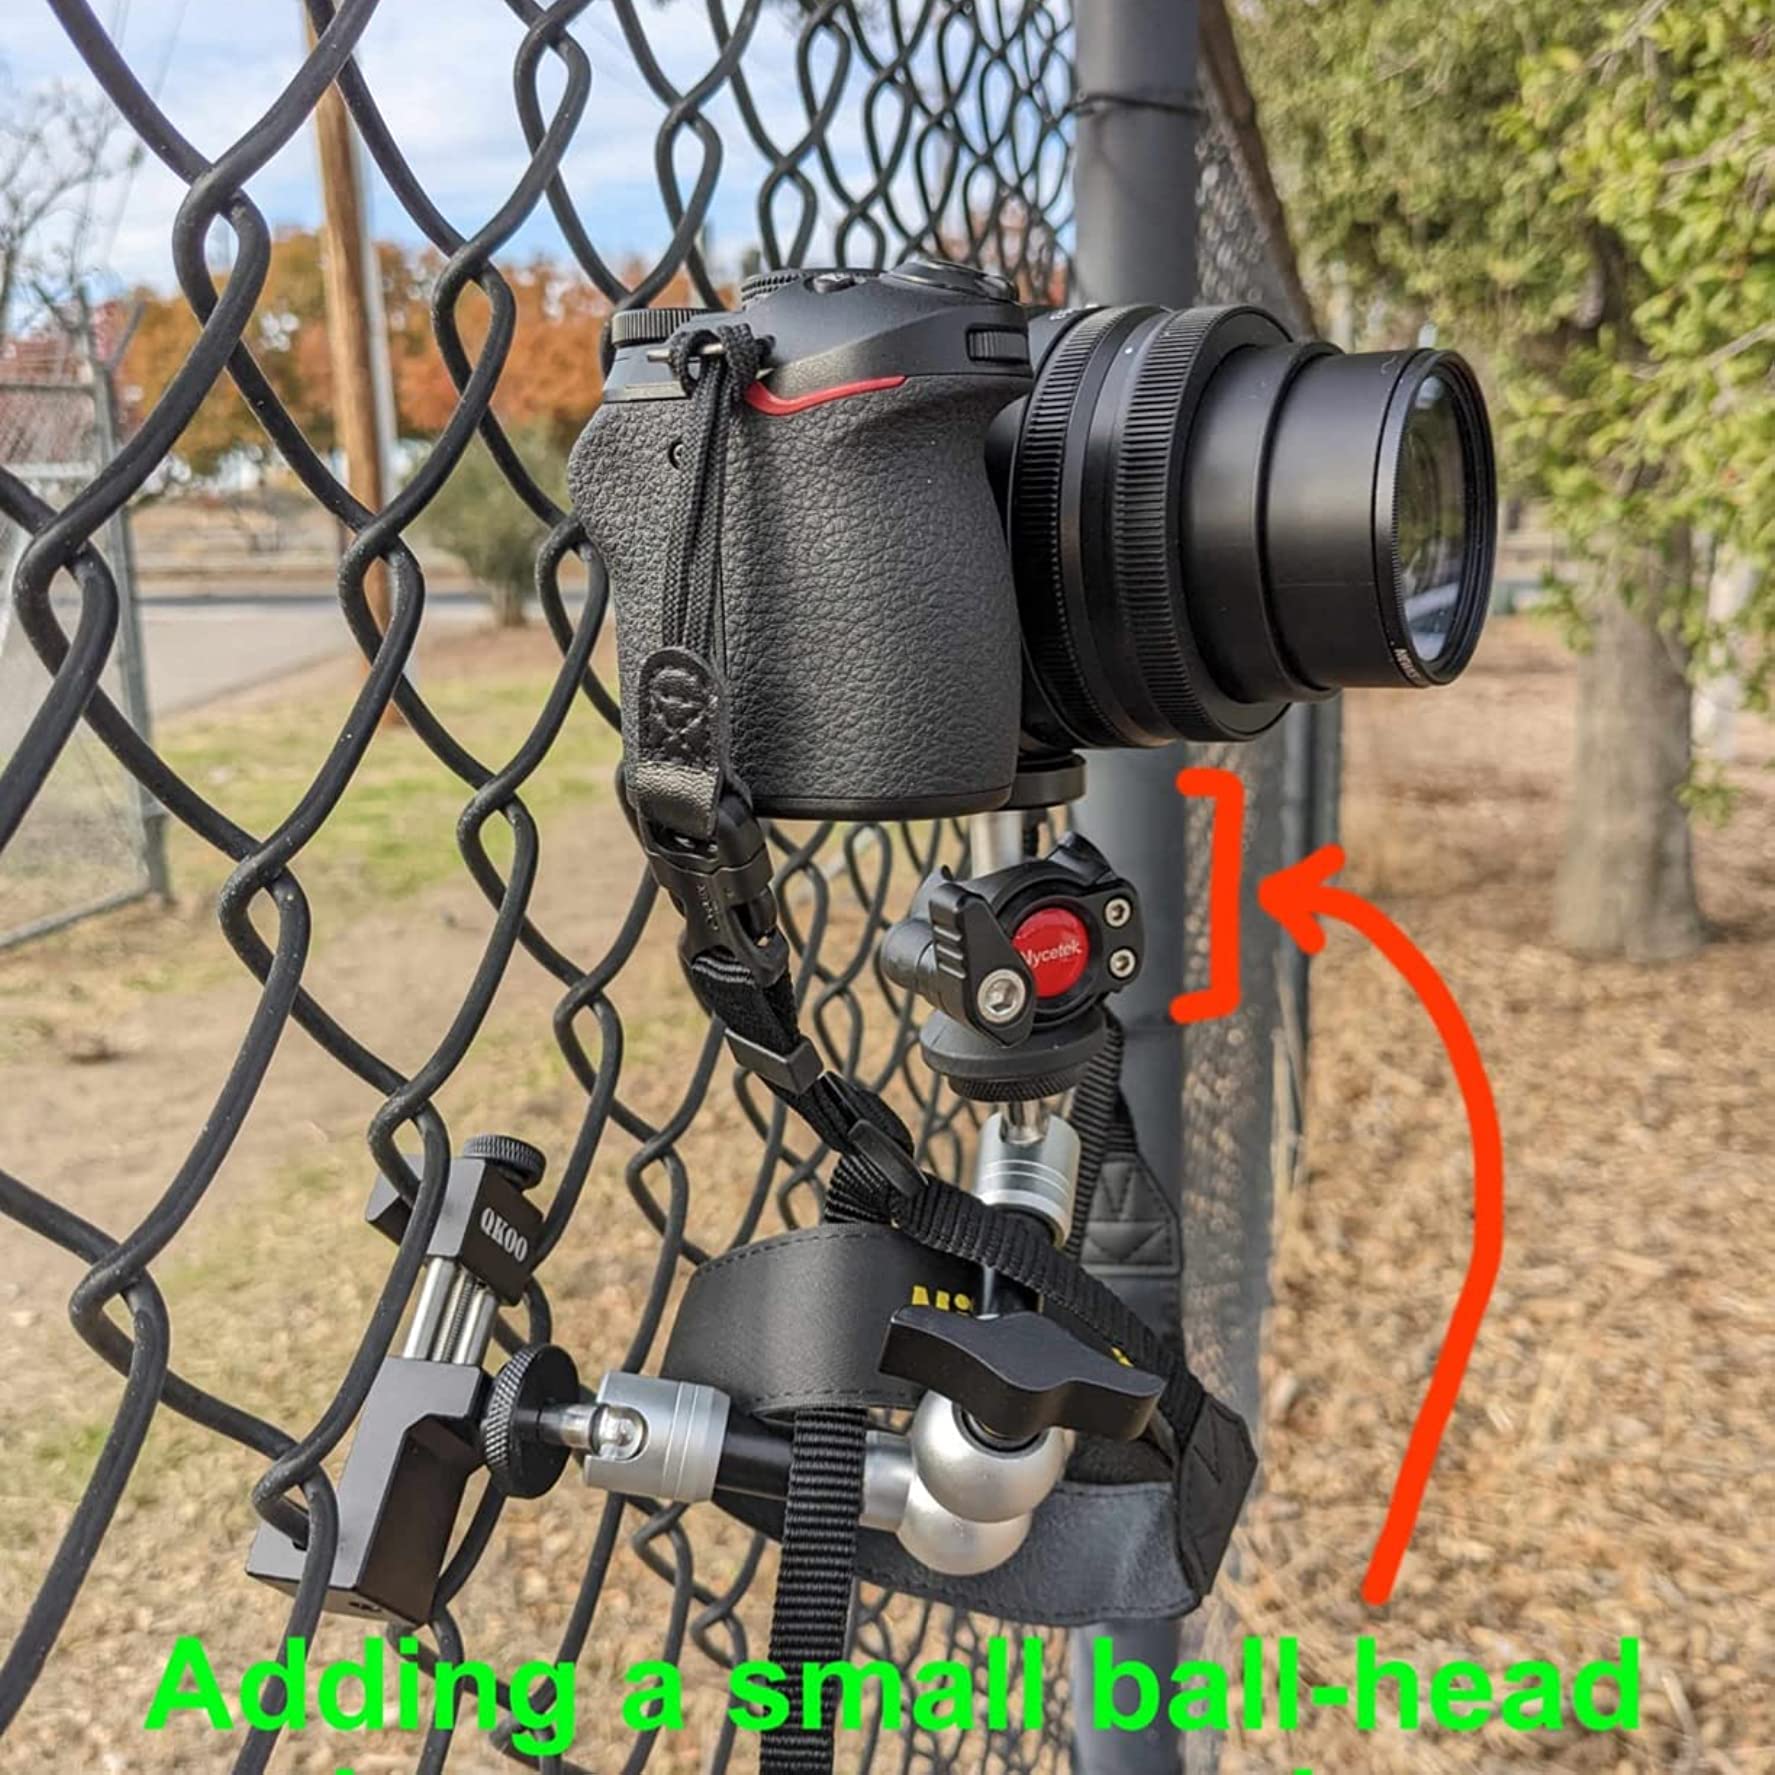 Holds securely even a small mirrorless camera. But didn't work on larger-mesh chain-link fences.